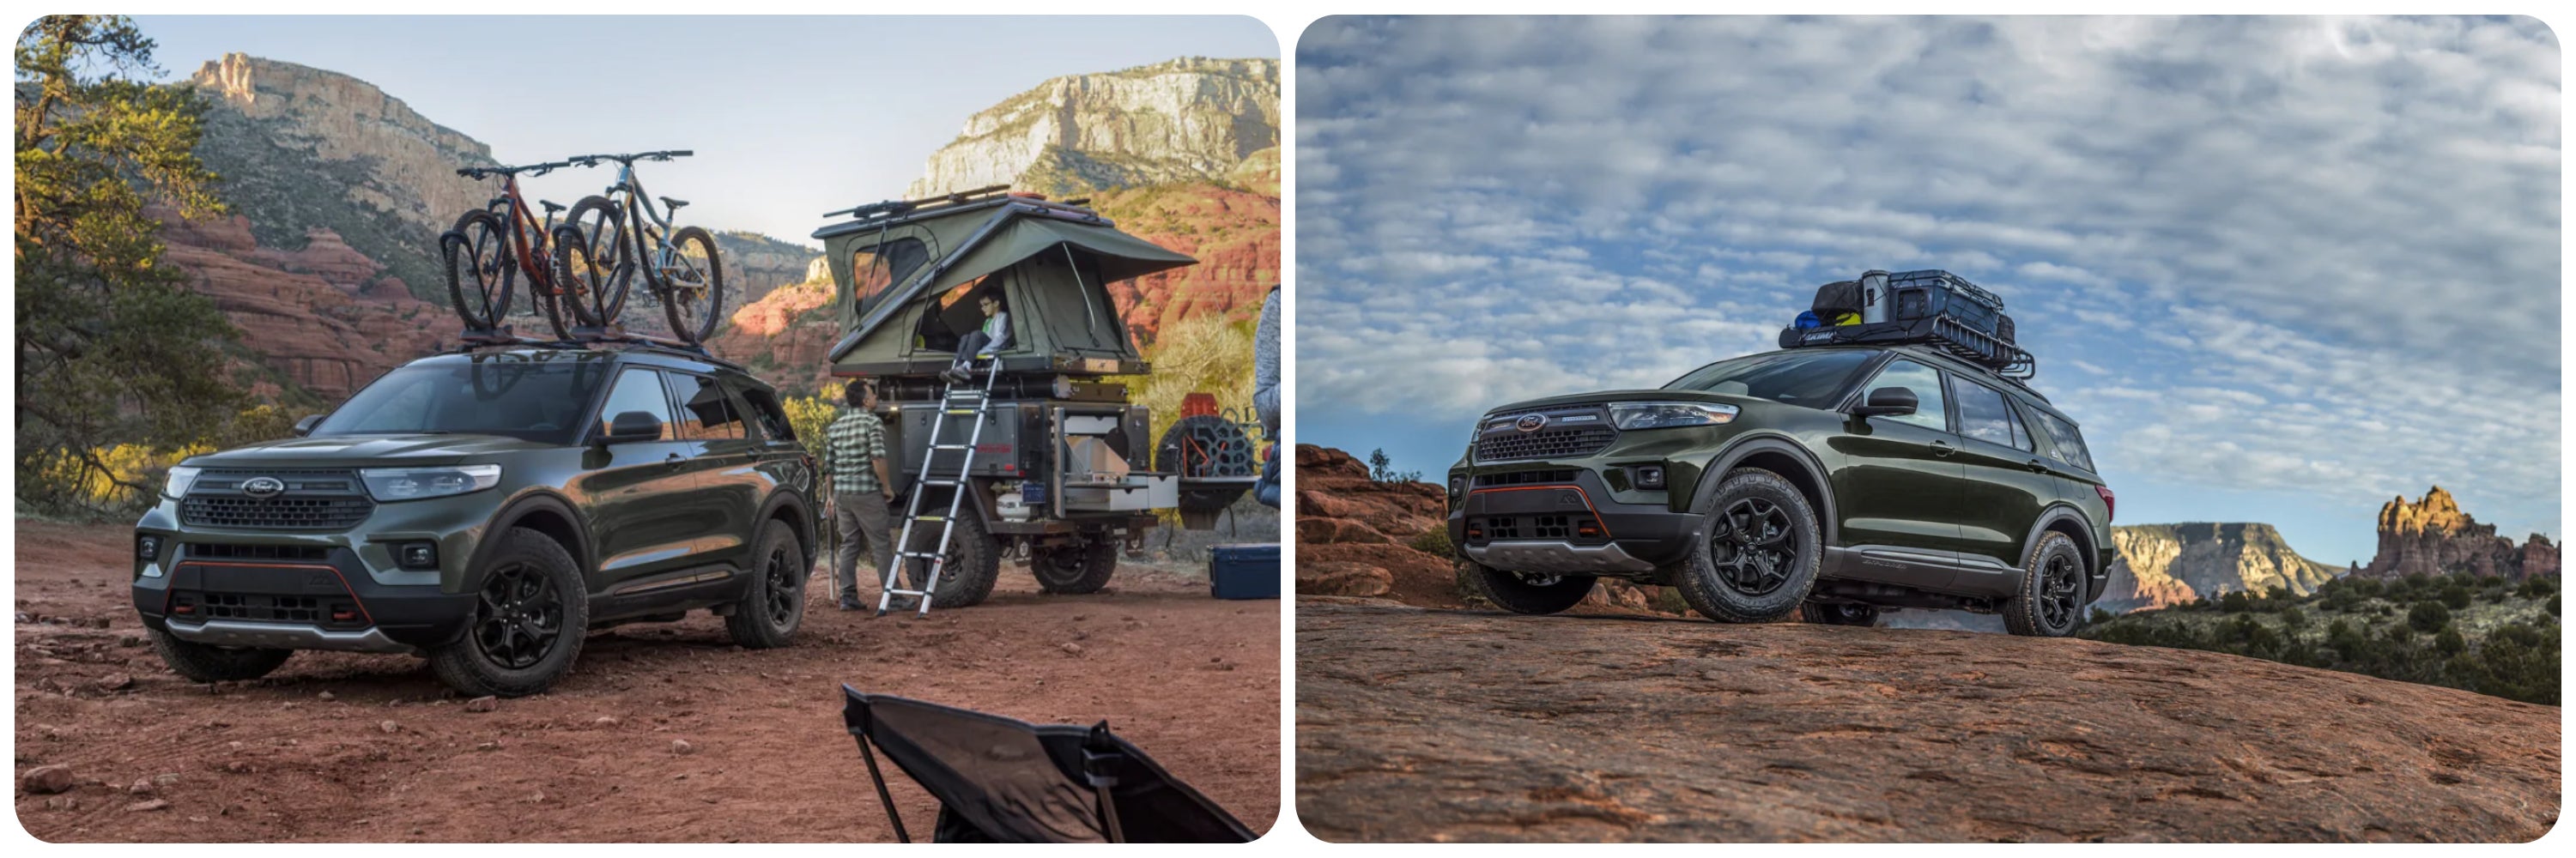 On the left a tent is attached to the back of a 2024 Ford Explorer at a campsite, and on the right a view of the cargo hold of the 2022 Ford Explorer